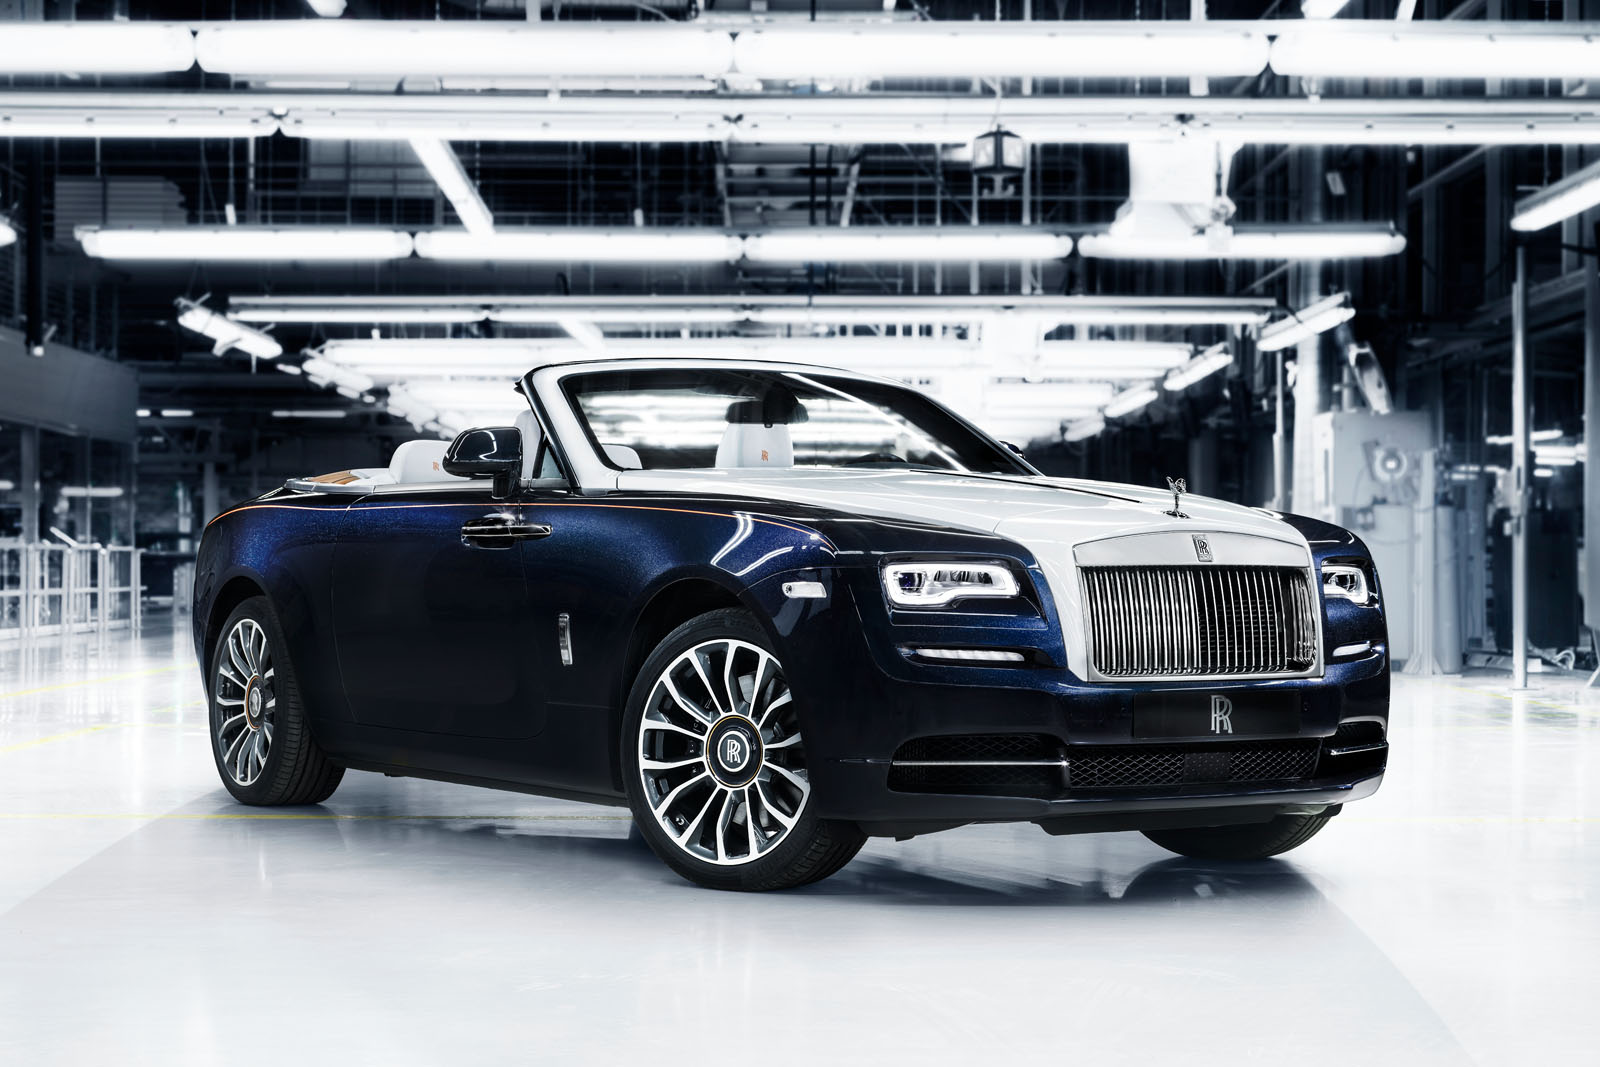 RollsRoyce commemorates end of Wraith production with limitededition model